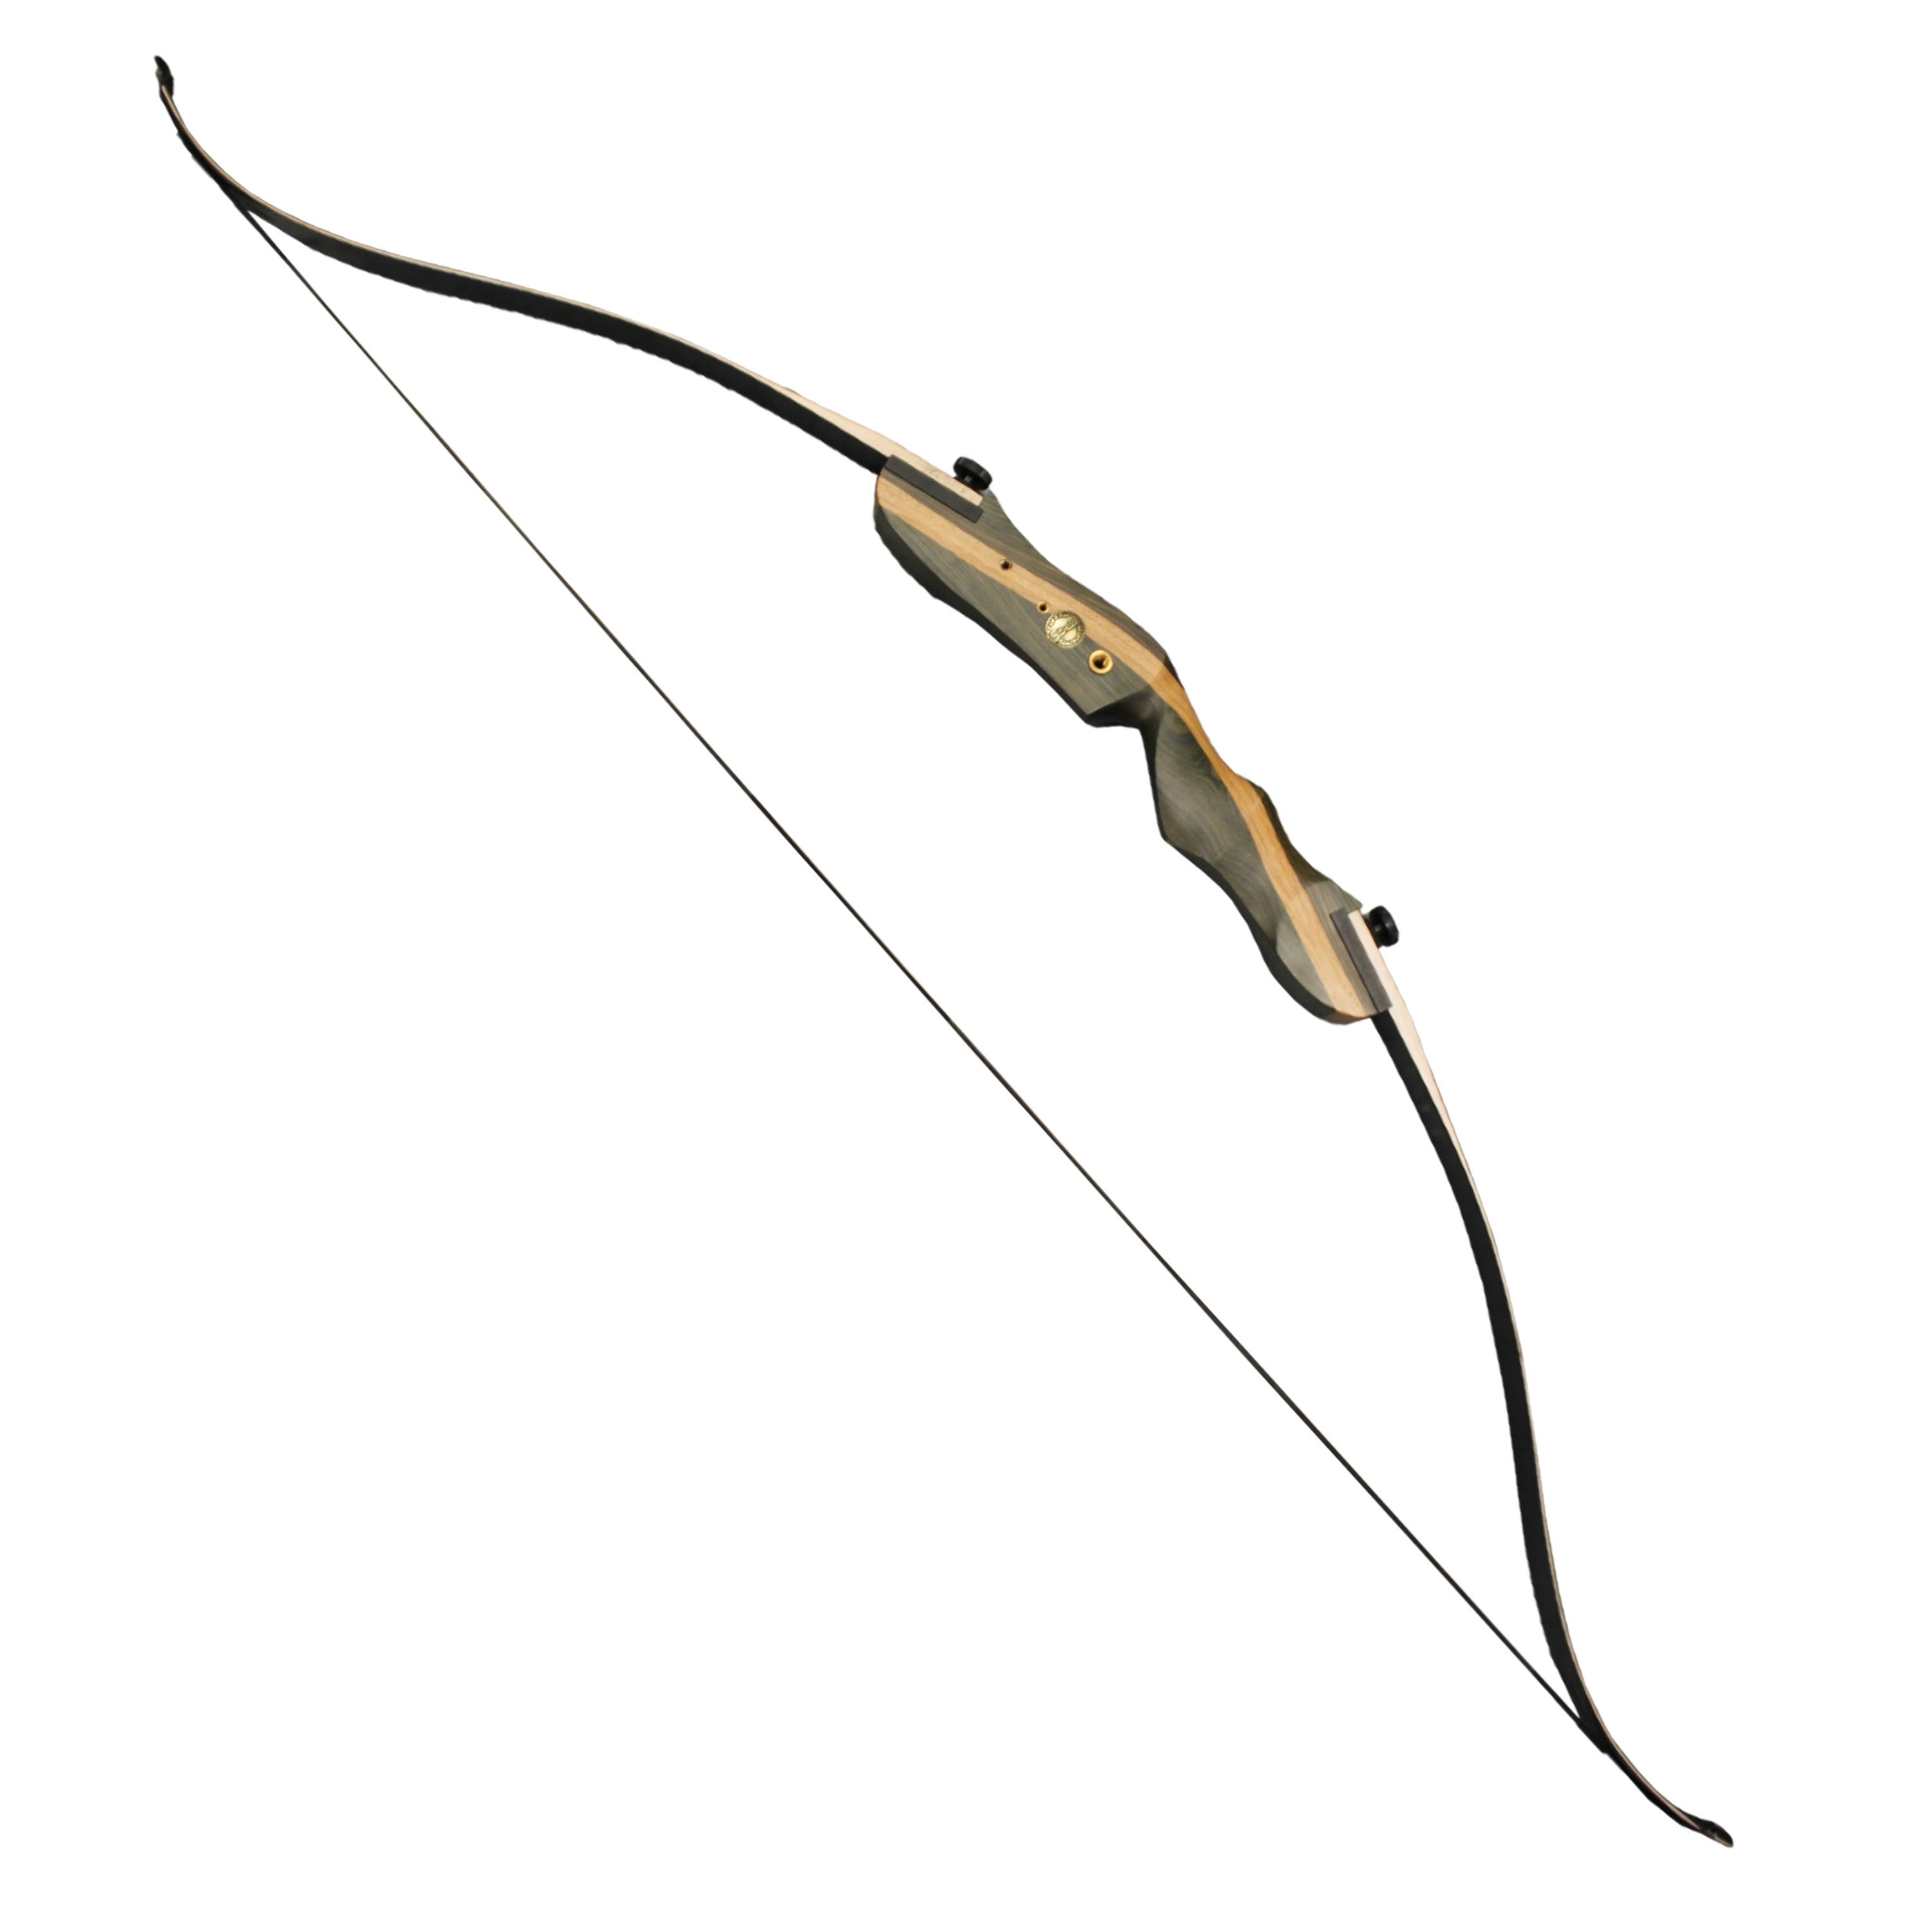 18lbs TRADITIONAL  ARCHERY RECURVE LAMINATED BOW Bamboo Hard Wood Child Woman 